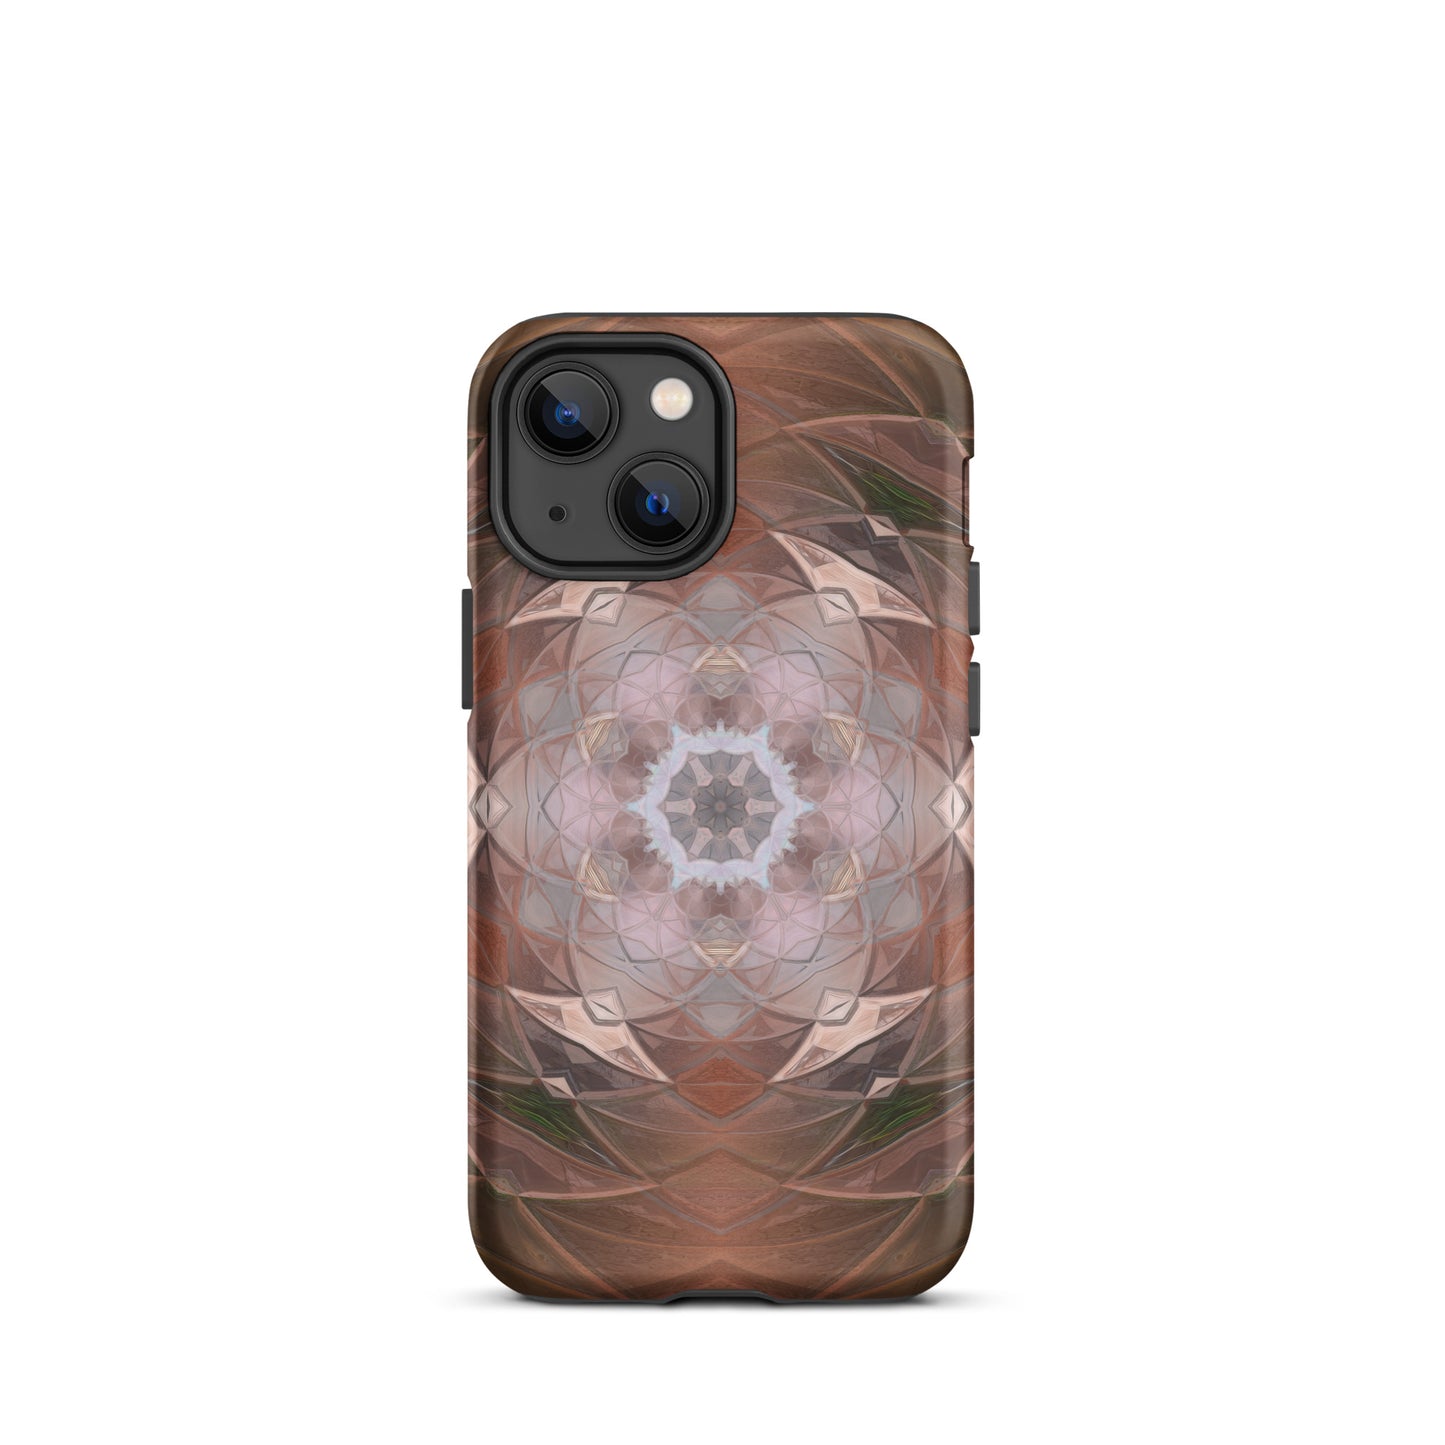 "Riveted" Tough iPhone case